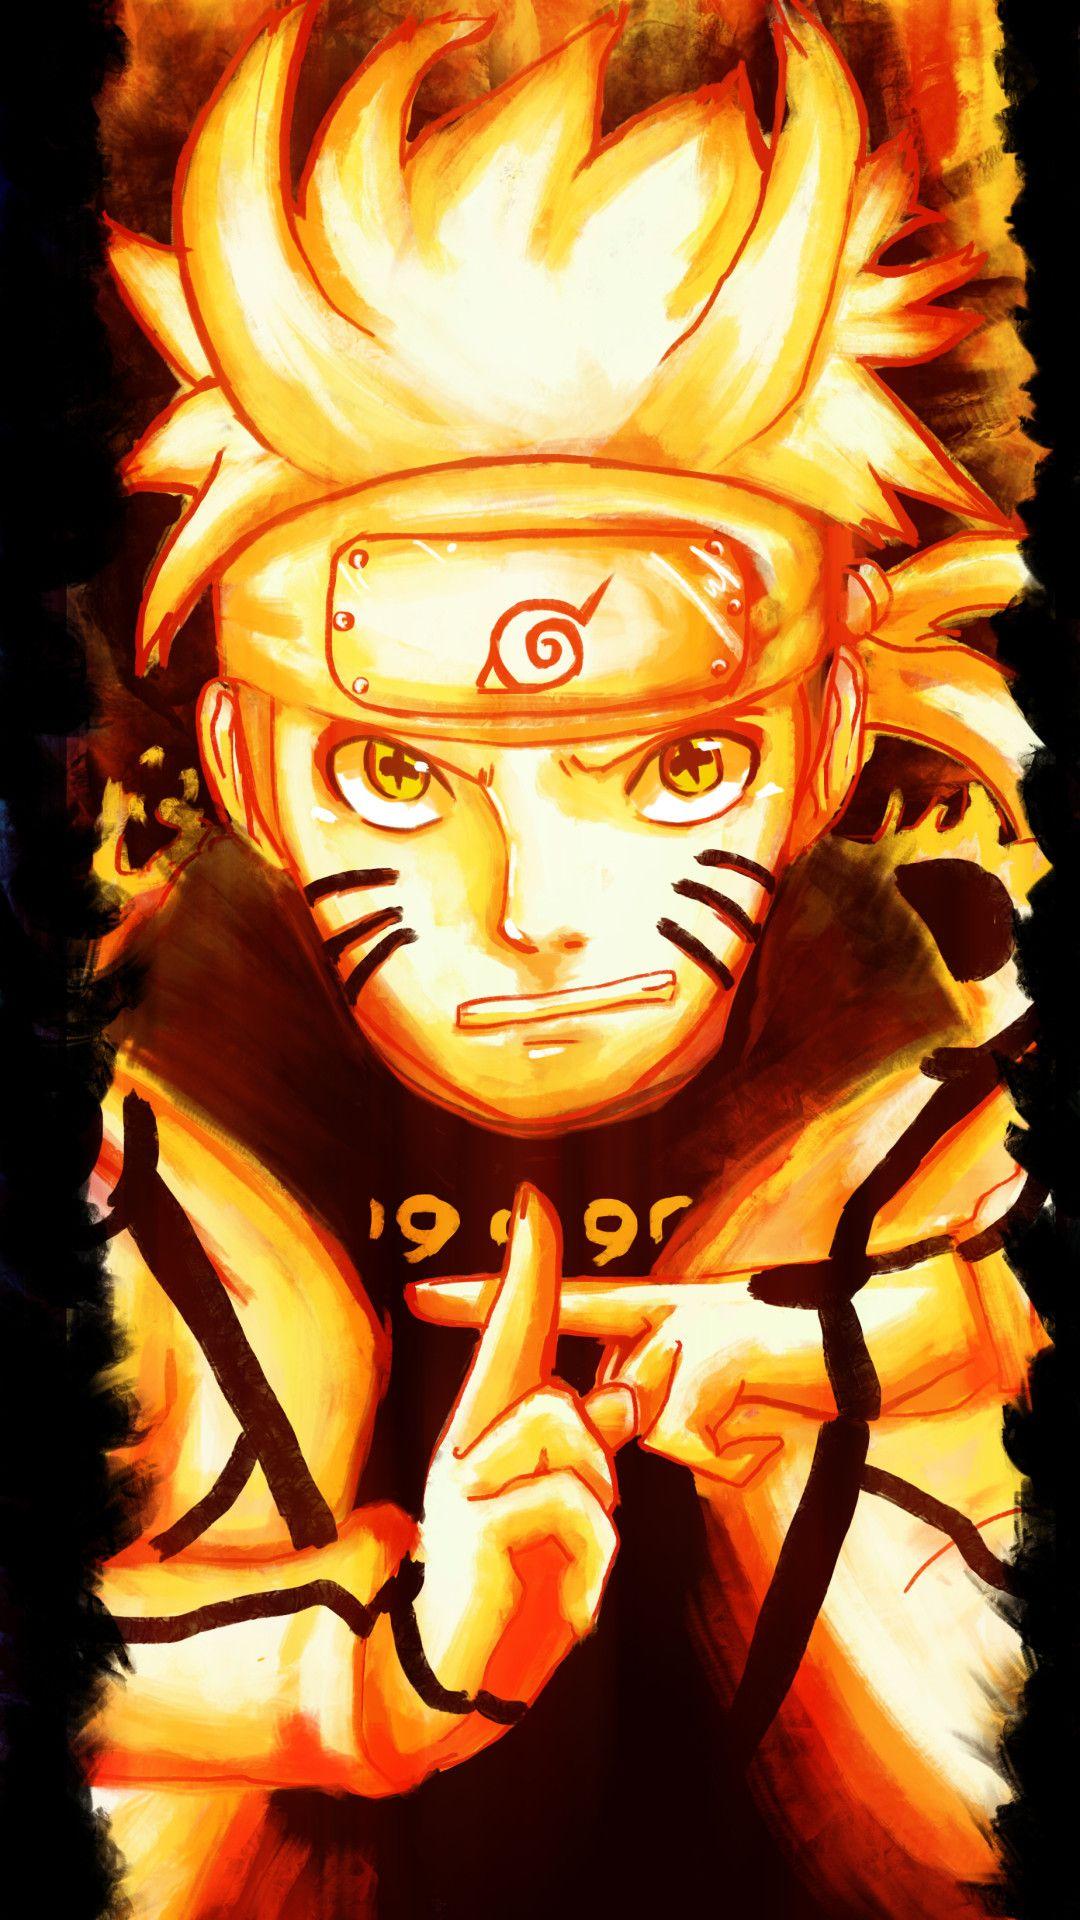 1080 x 1920 · jpeg - [220+] 4k naruto - Android, iPhone, Desktop HD Backgrounds / Wallpapers ...